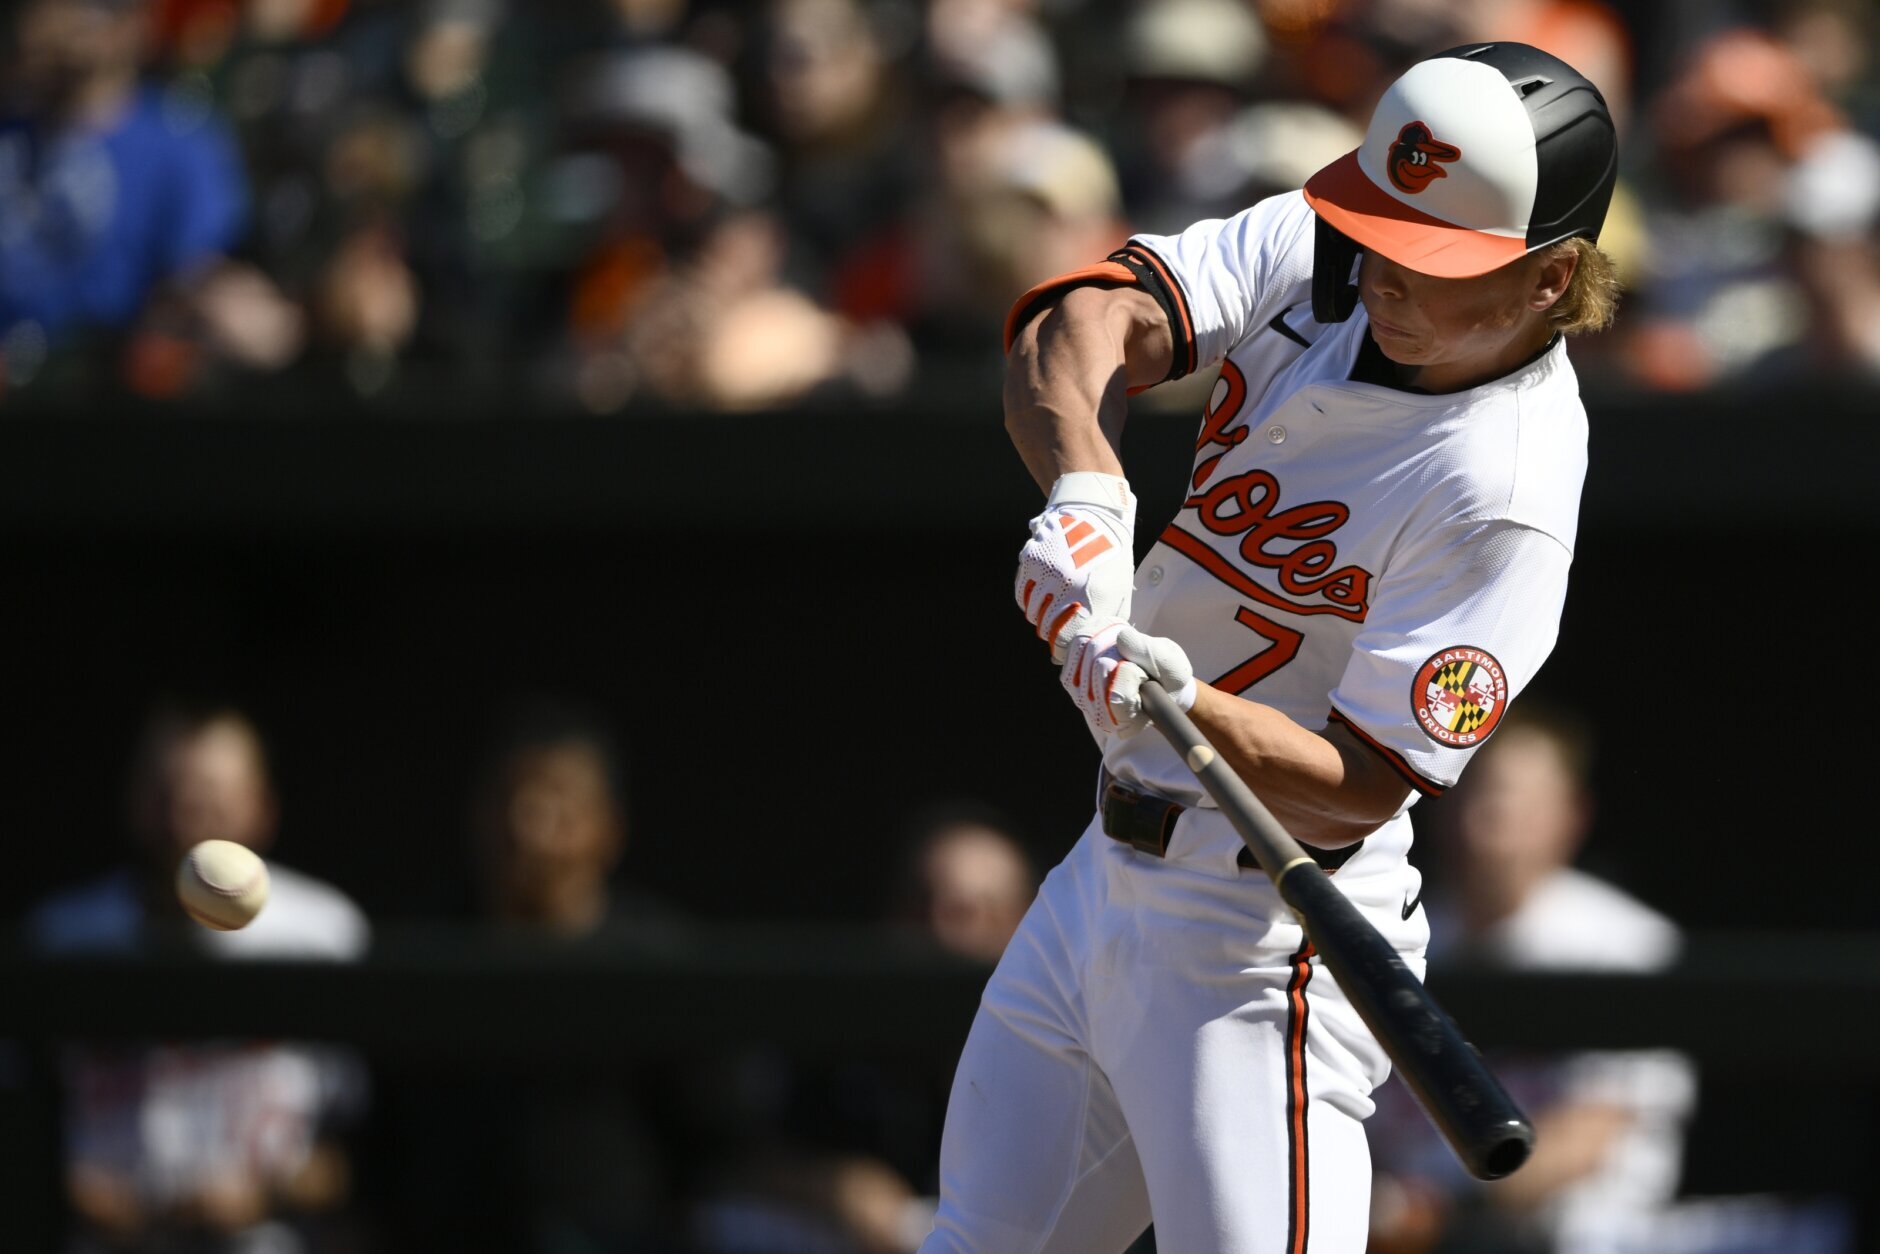 The Orioles aren’t trying to hit home runs. They keep coming anyway.